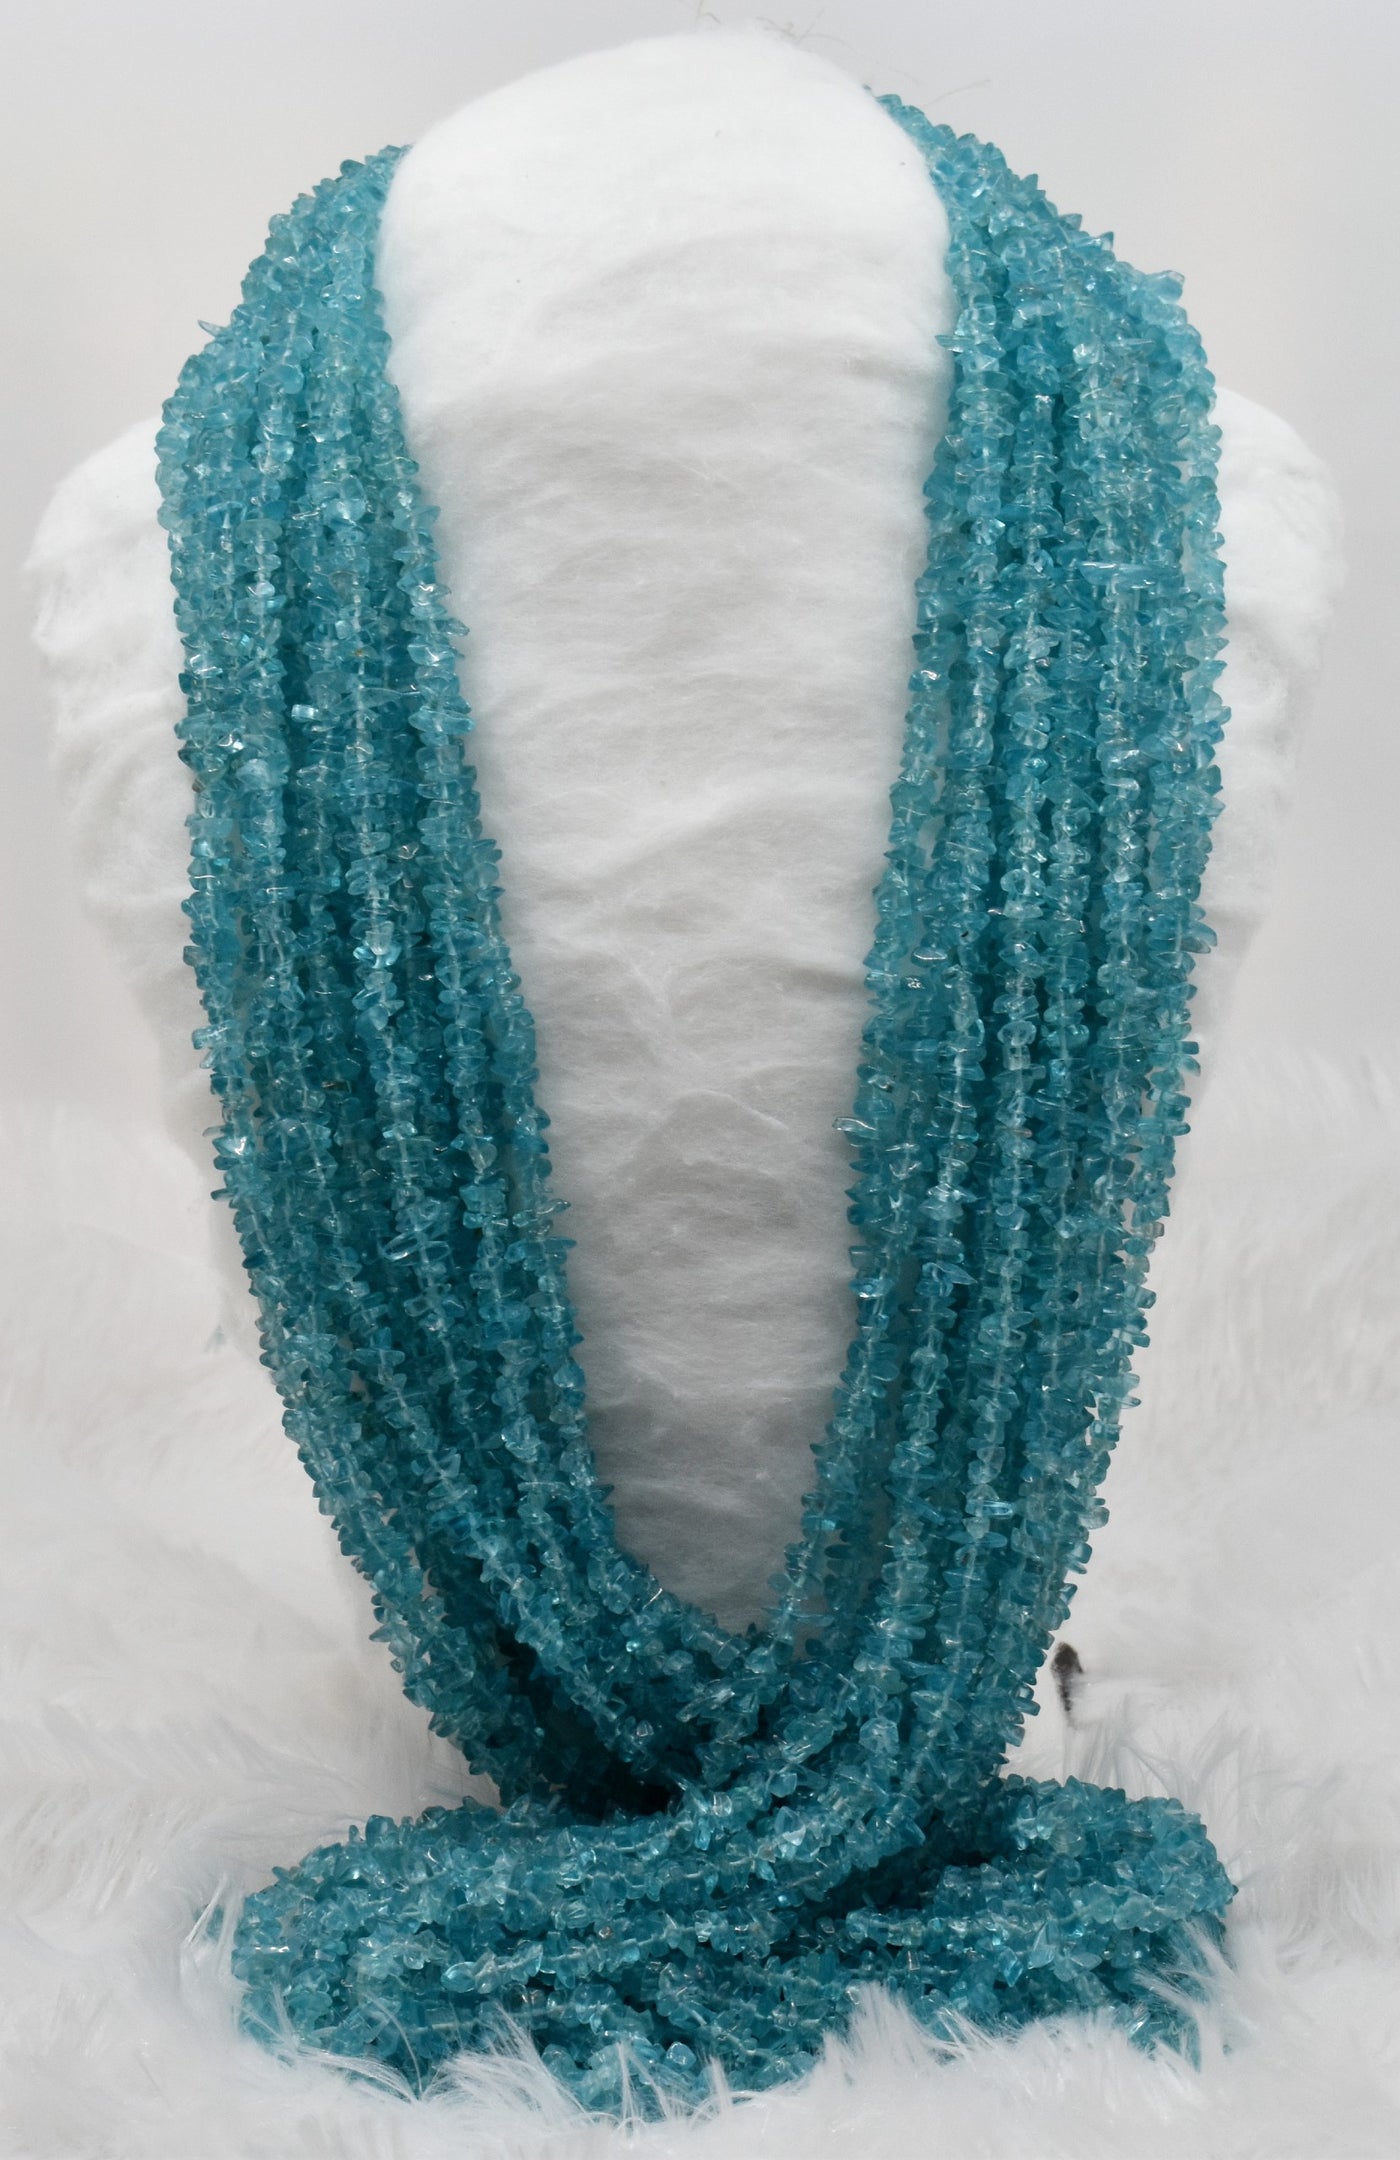 Uncut Raw Apatite Crystal Chip Beads for Necklace (Strength and Weight Control)